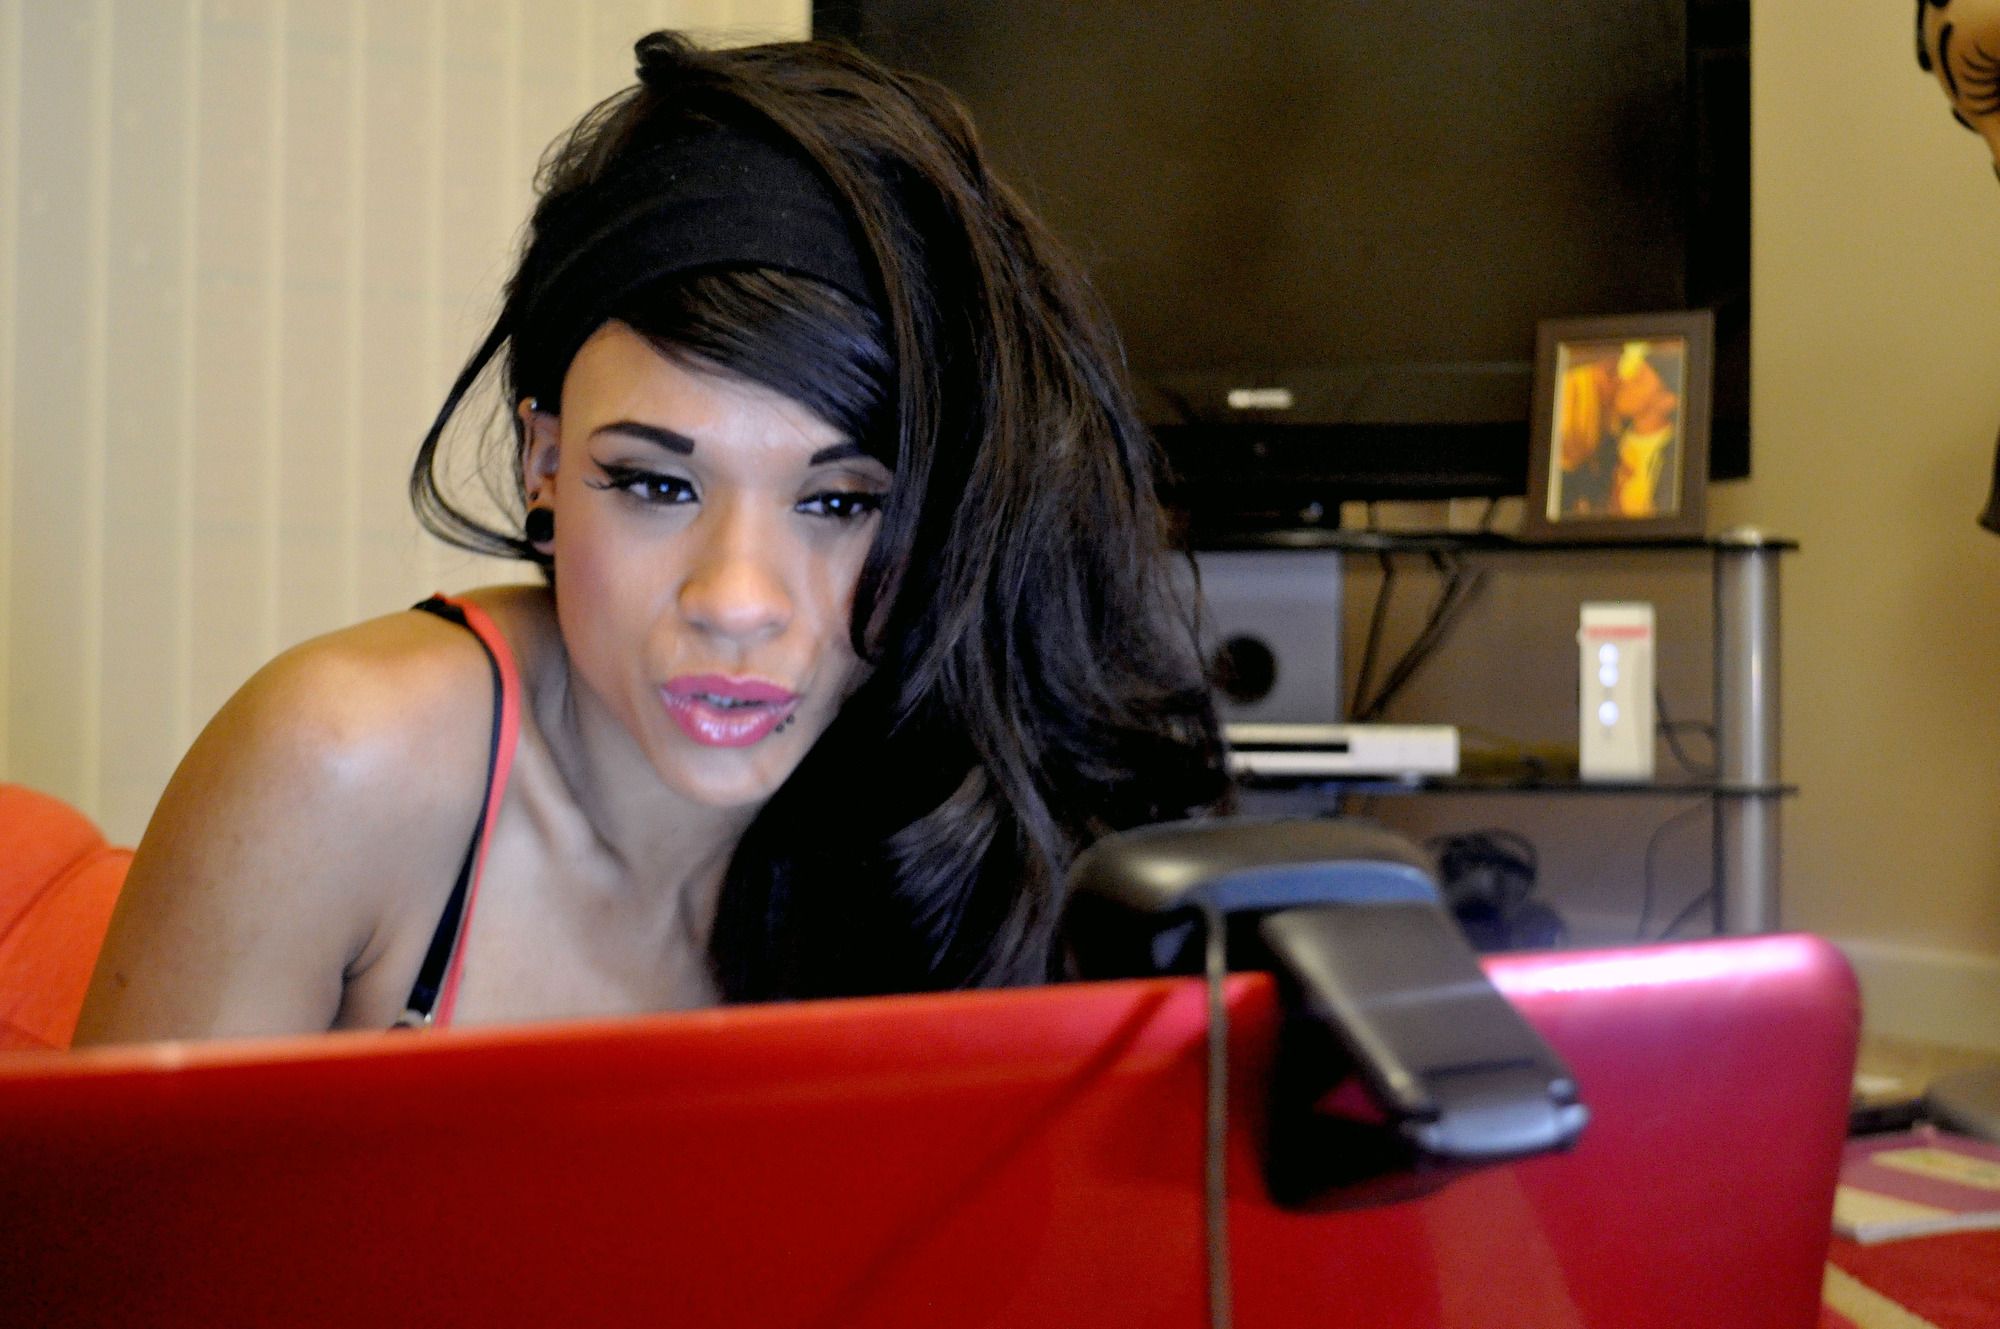 Black Girls Nude Webcam - The Truth About Webcam Girls: Review